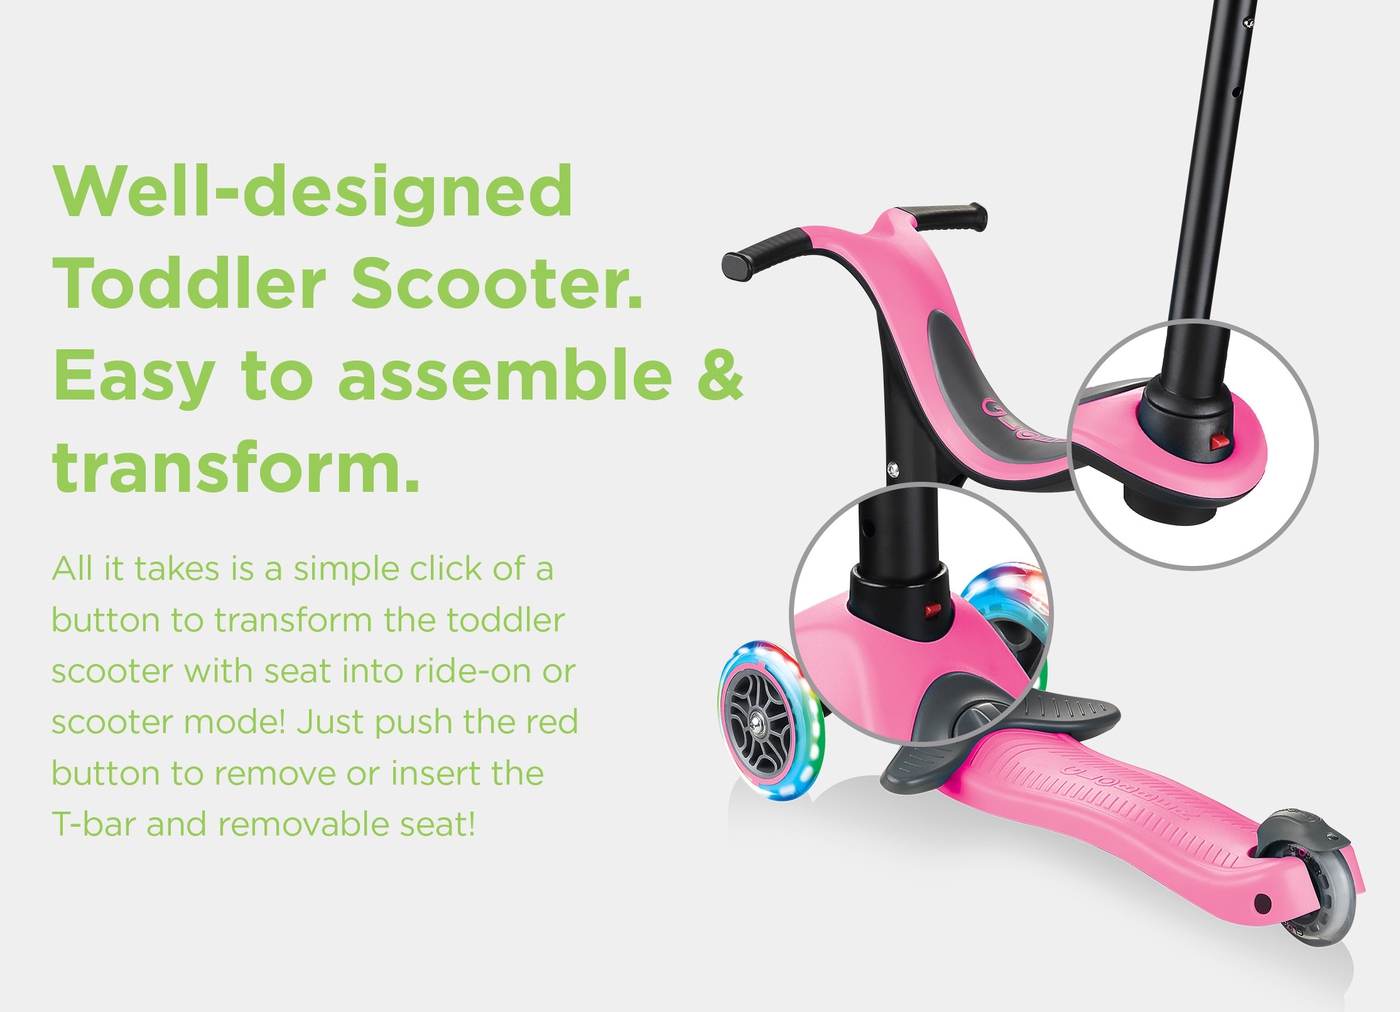 Well-designed Toddler Scooter. Easy to assemble & transform.